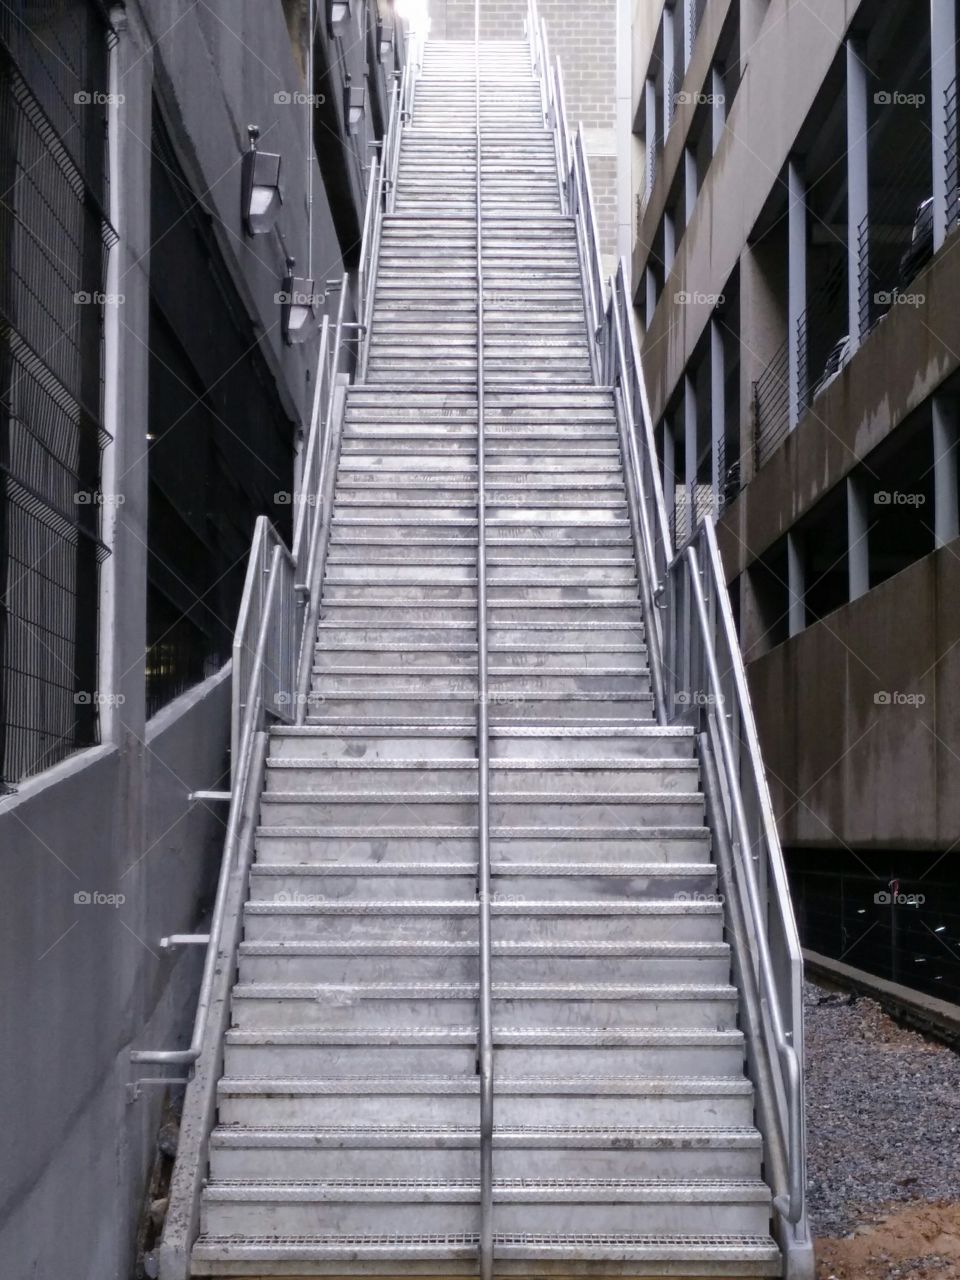 The Long Stairs